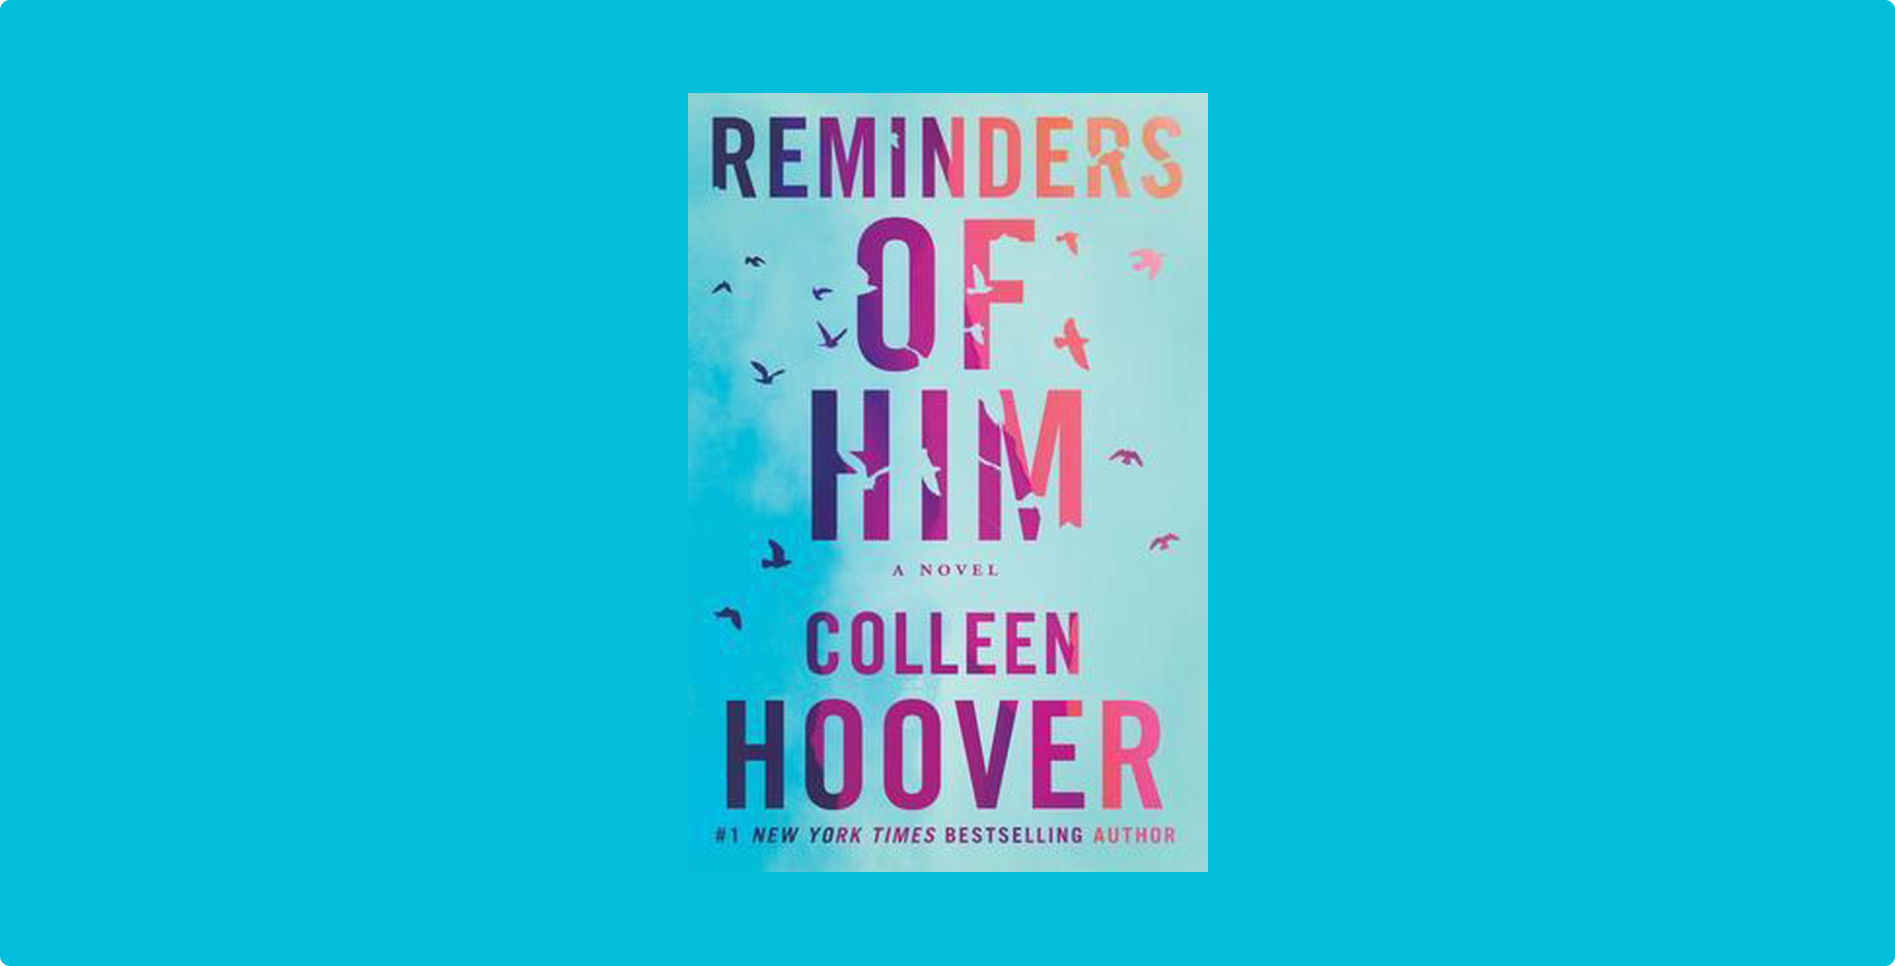 Reminders of him by colleen Hoover